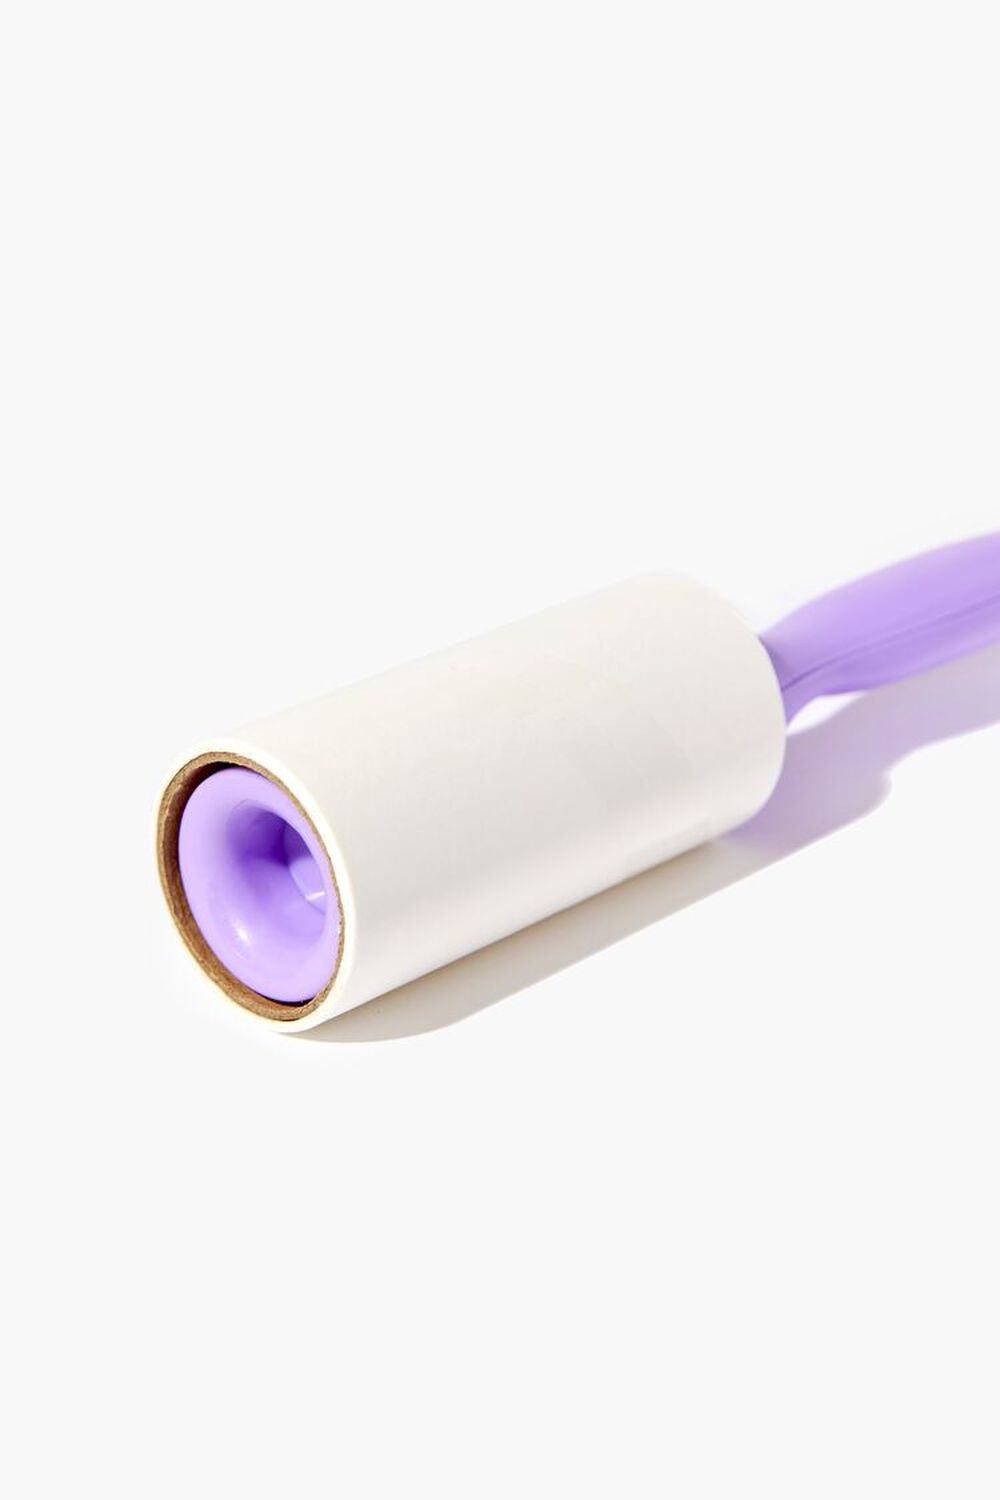 Printed Lint Roller, image 2